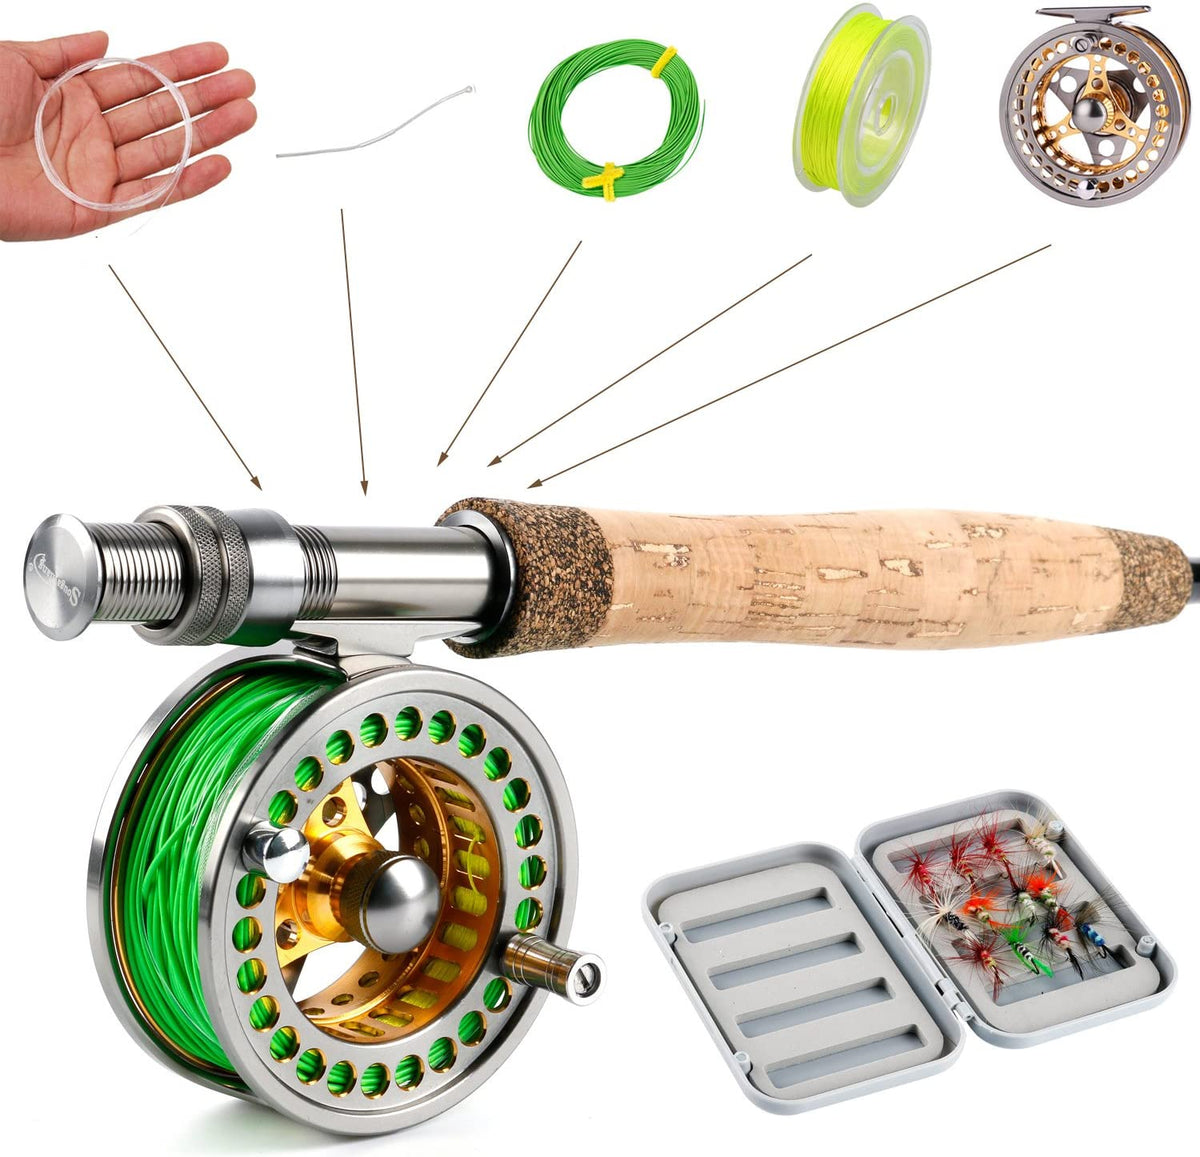 Fly Fishing Switch Rod 11ft 4Sec with Fly Reel 5/6 & Fly Fishing Line Kit